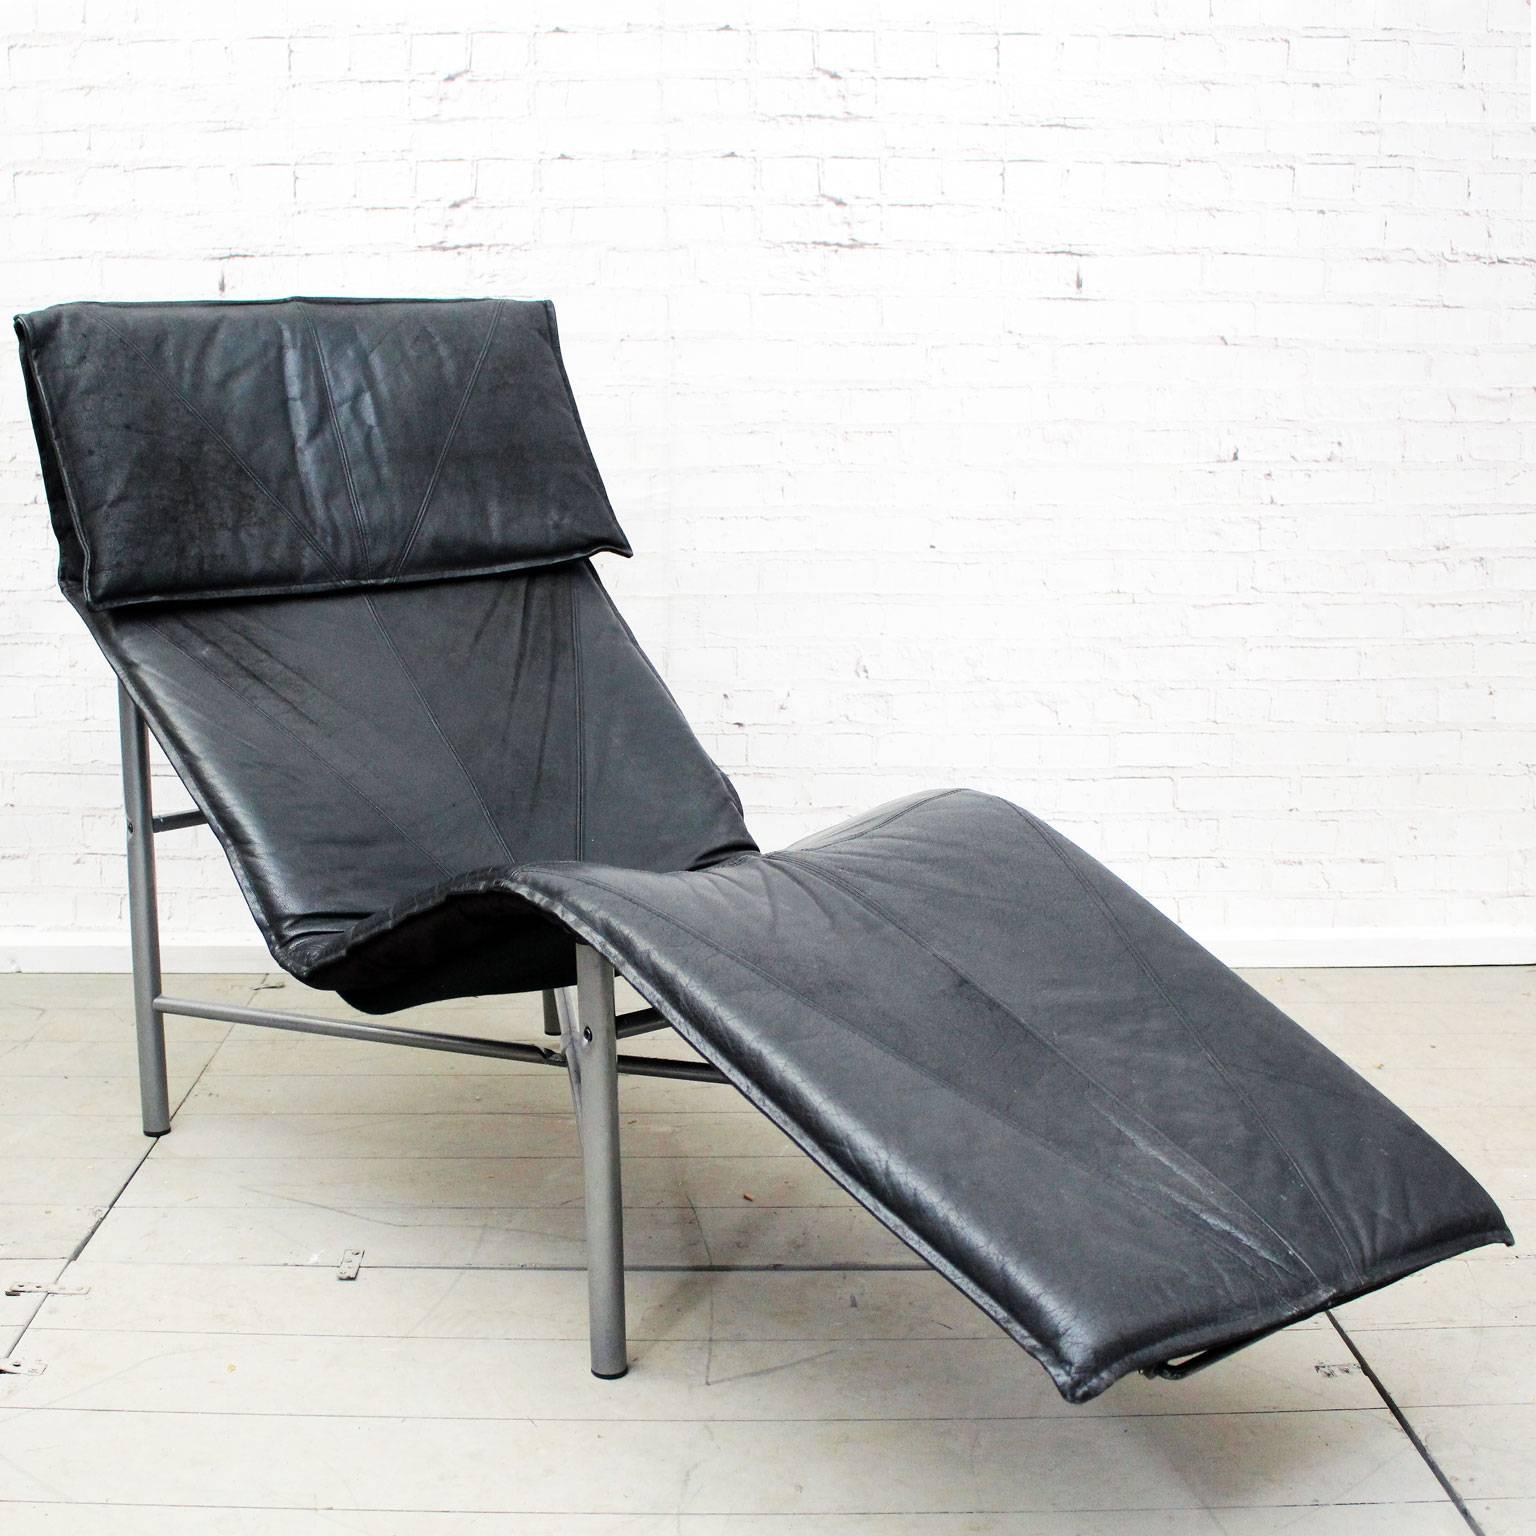 Late 20th Century Black Leather Chaise Longue by Tord Bjorklund For Sale